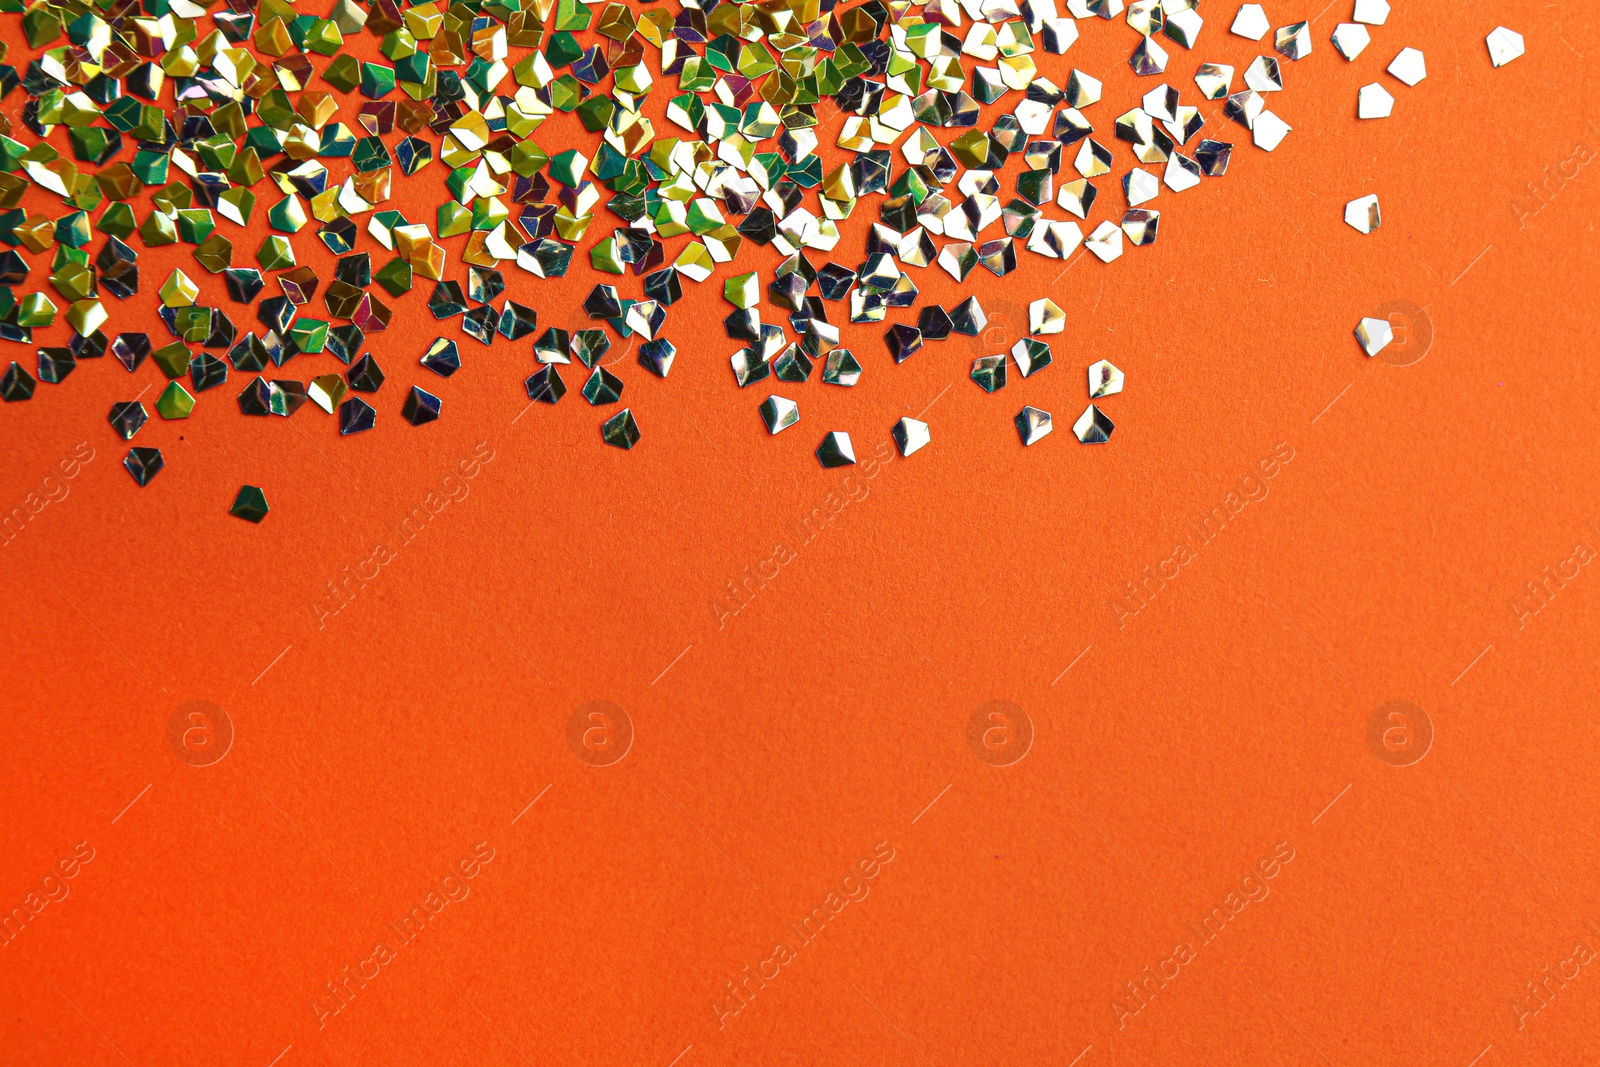 Photo of Shiny bright glitter on coral background, flat lay. Space for text